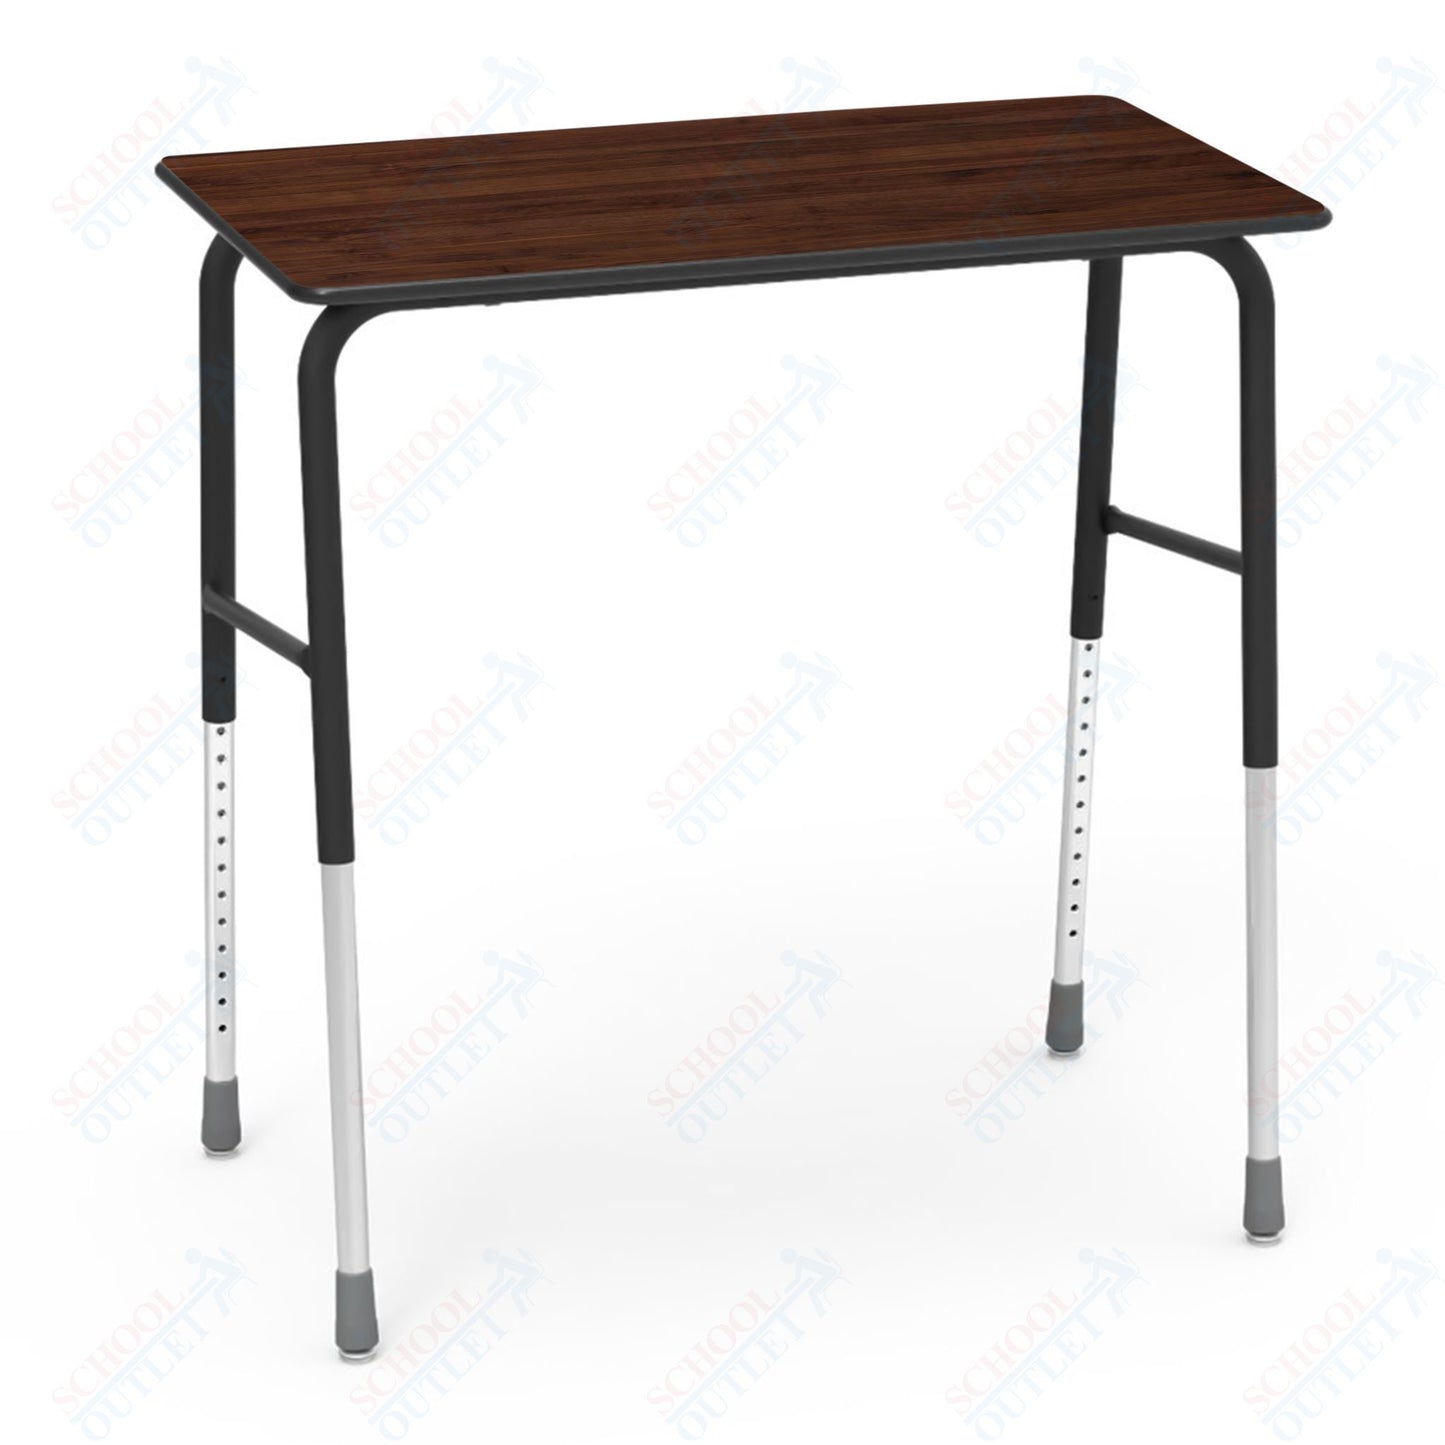 Virco 723W 723 Series ADA Student Desk with Laminate Top